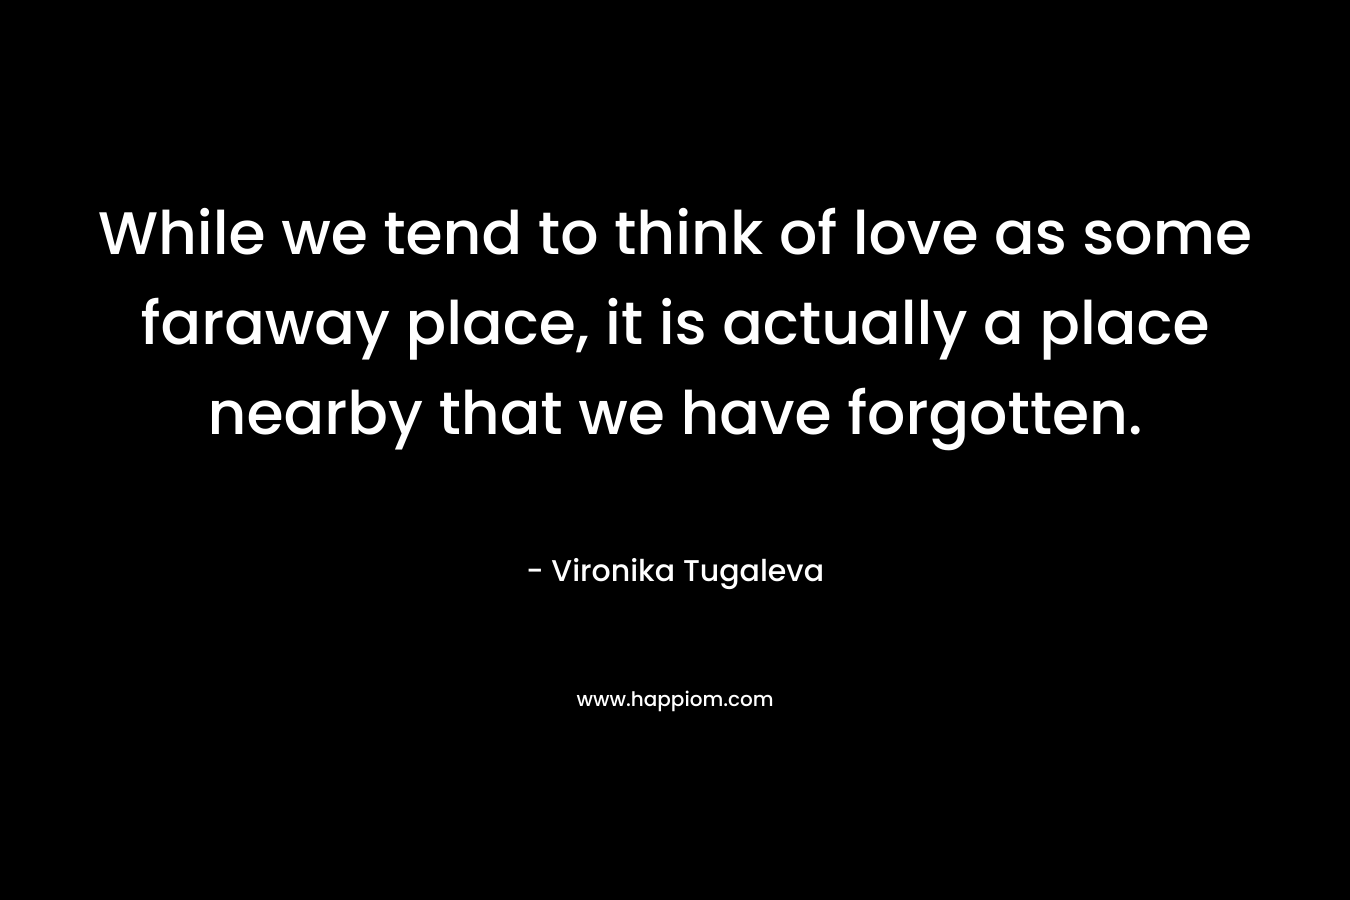 While we tend to think of love as some faraway place, it is actually a place nearby that we have forgotten. – Vironika Tugaleva